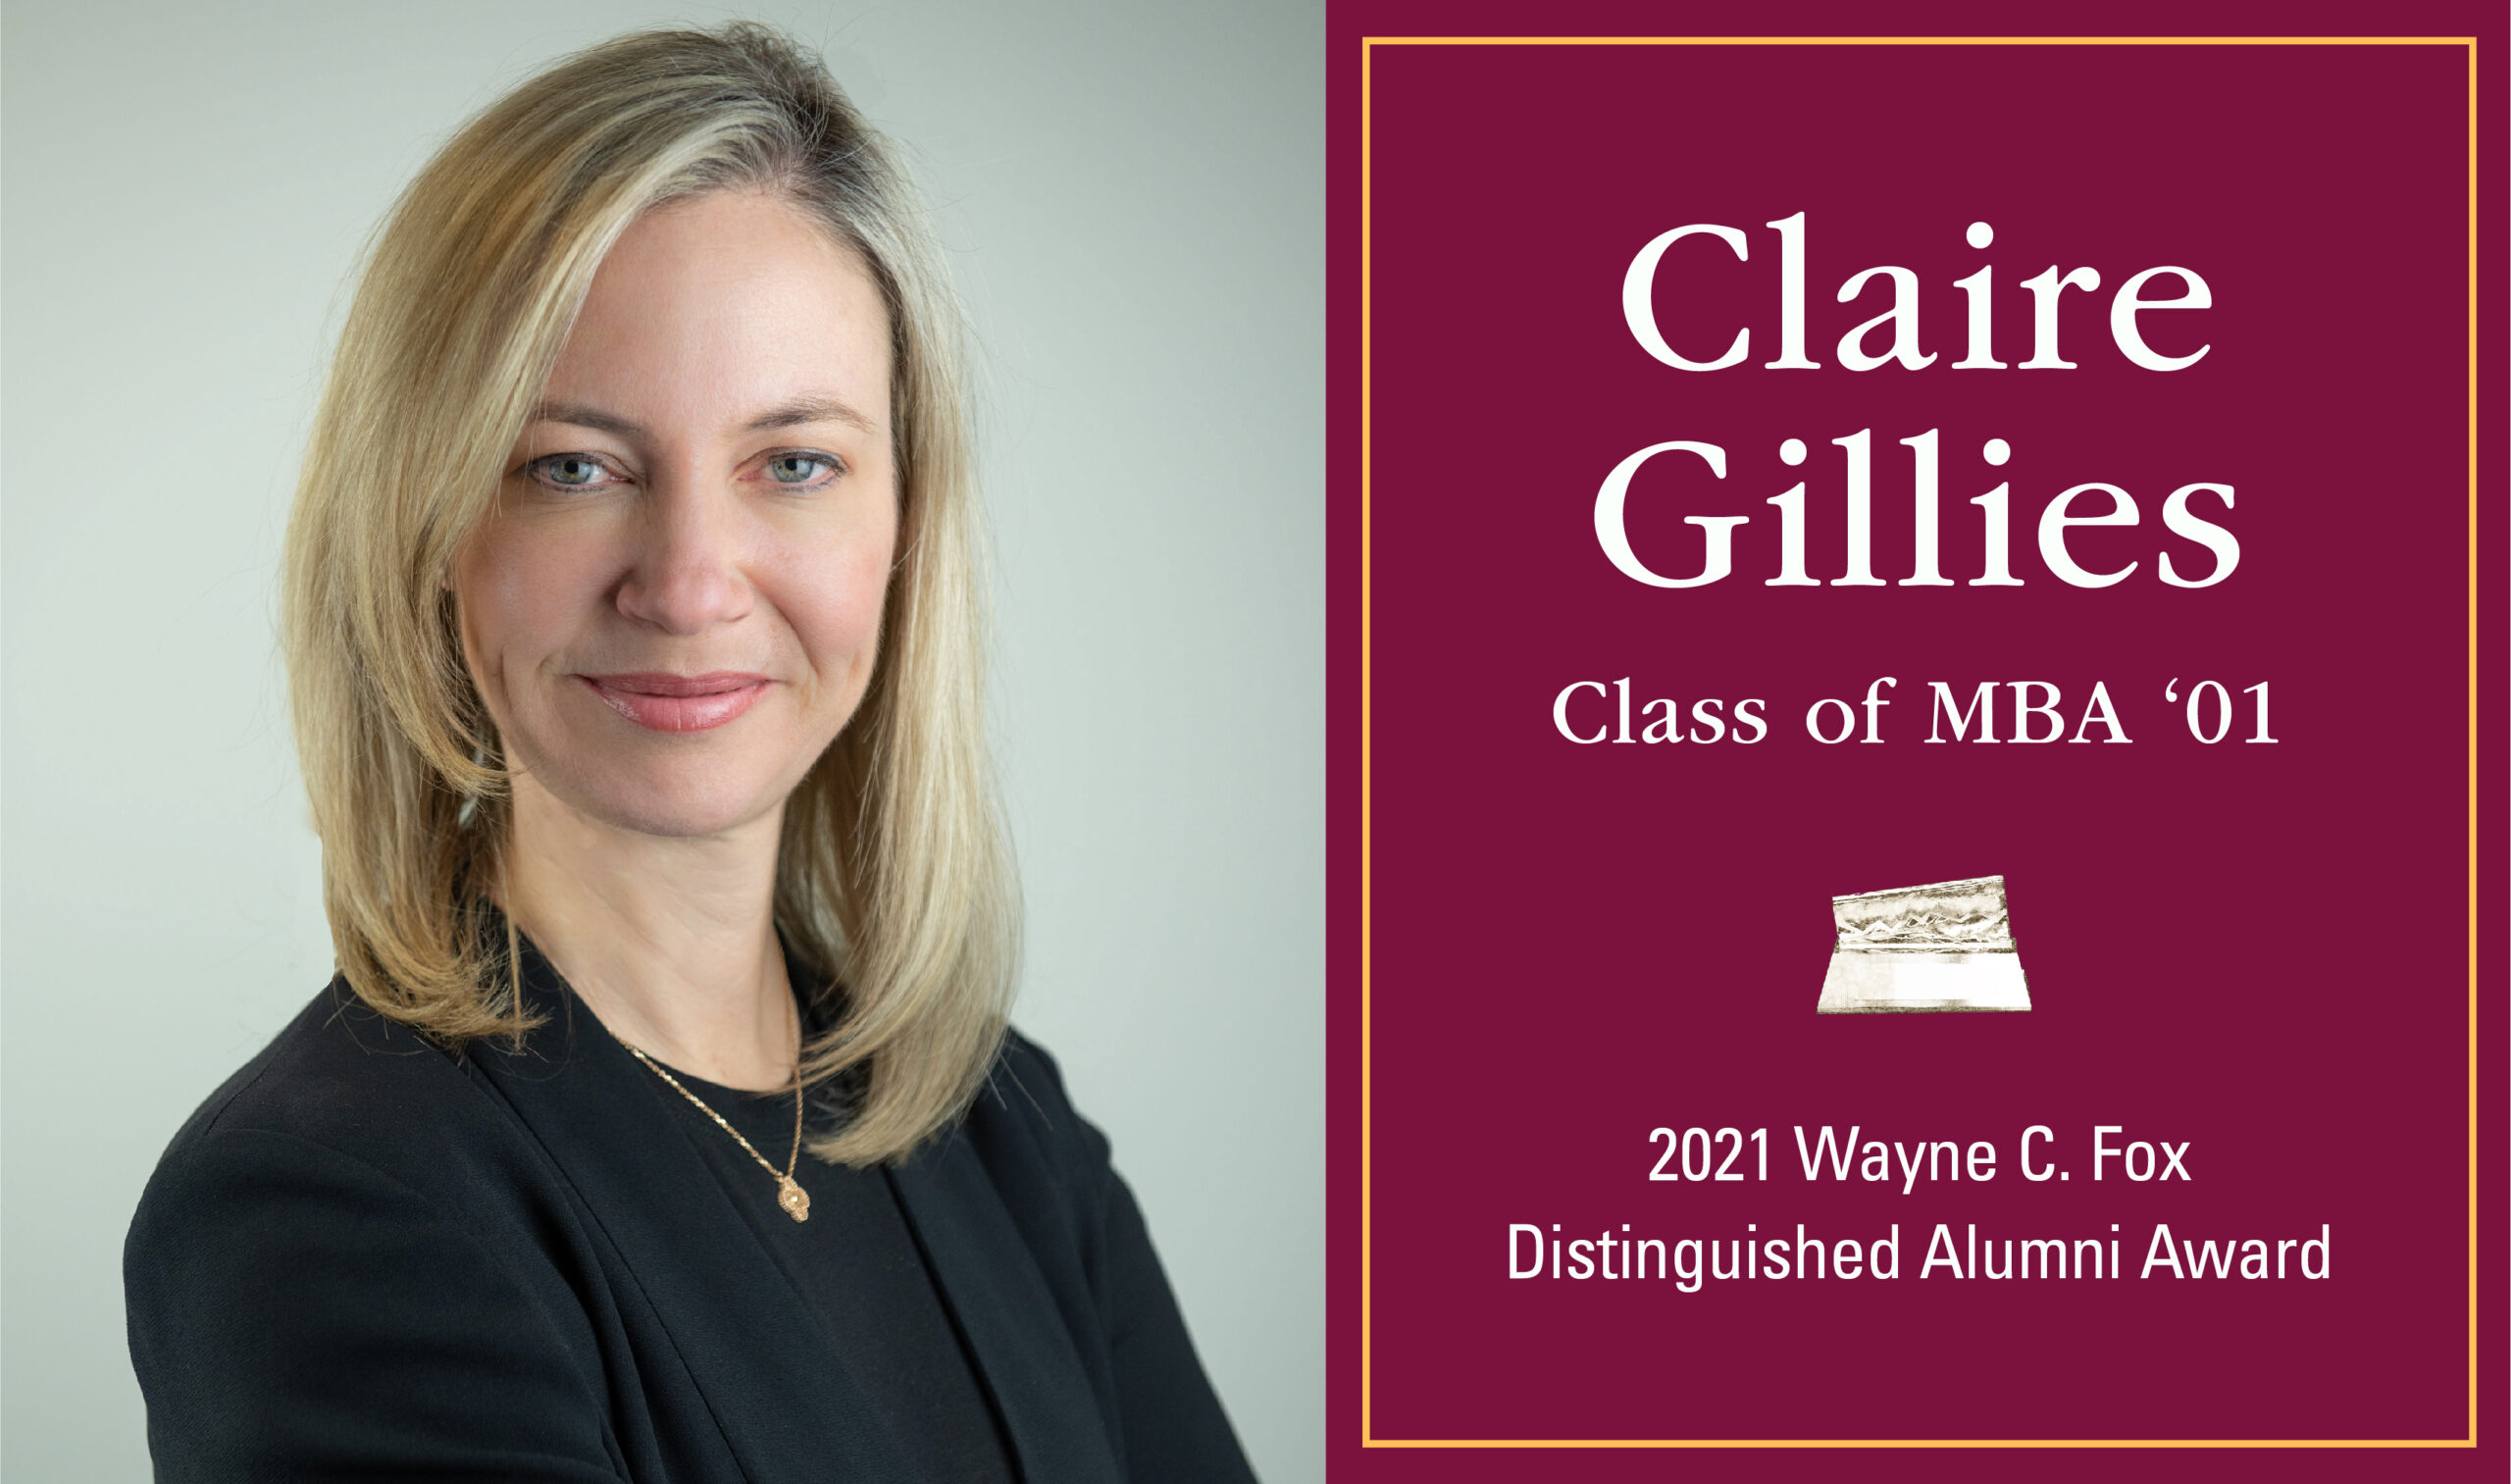 Photo of DeGroote School of Business alumna Claire Gillies looking forward with a grey background. Includes text Claire Gillies, Class of MBA '01, 2021 Wayne C. Fox Distinguished Alumni Award